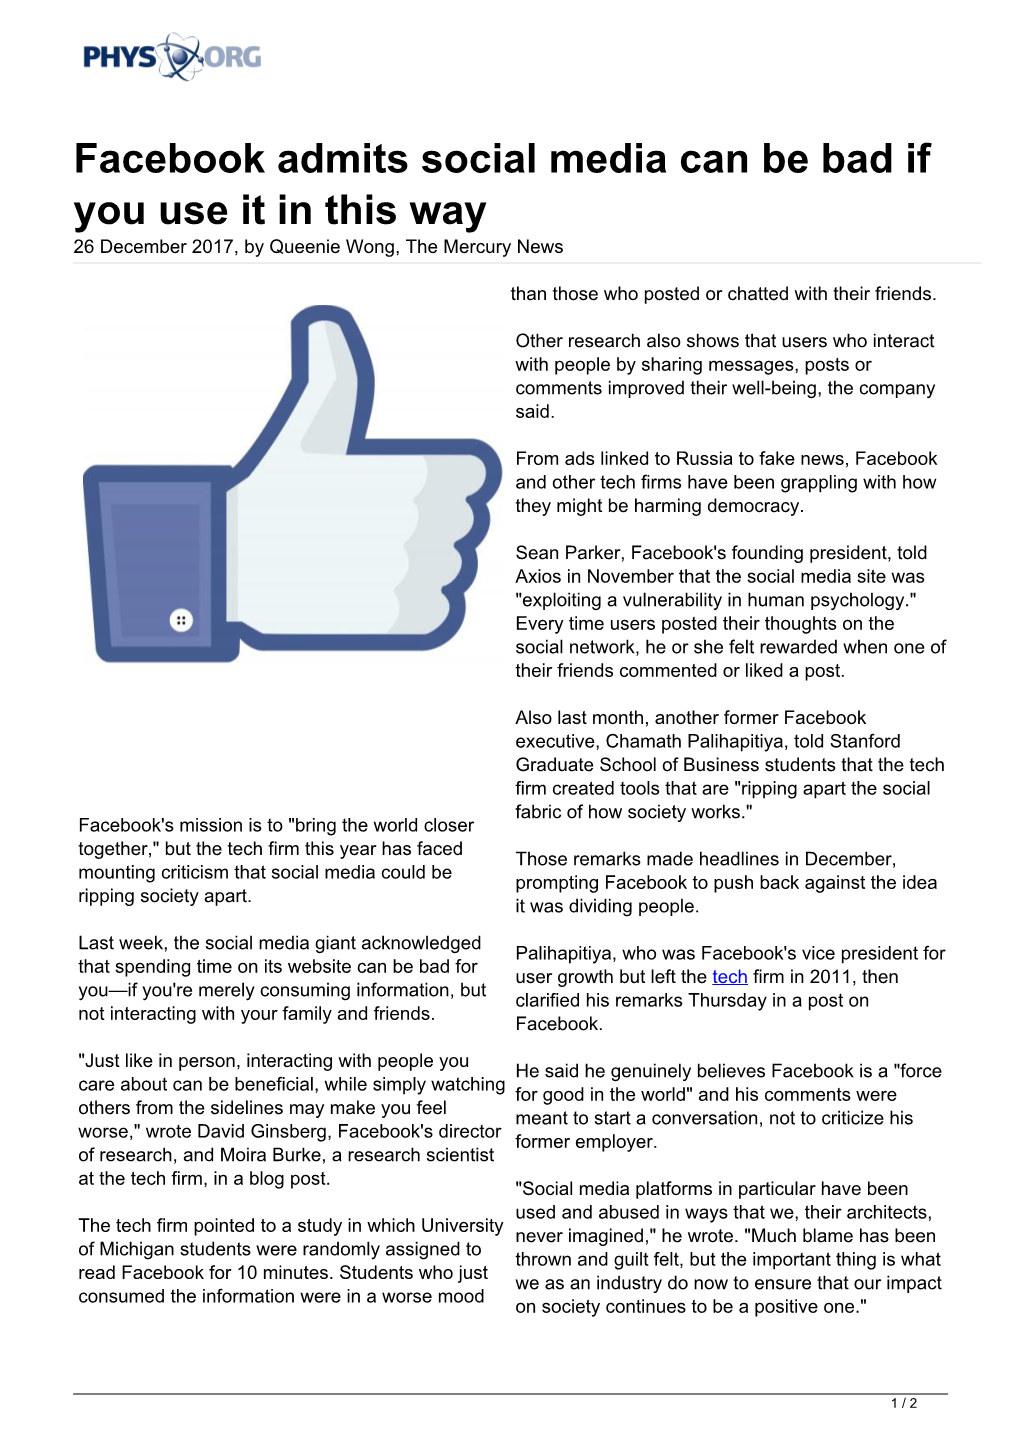 Facebook Admits Social Media Can Be Bad If You Use It in This Way 26 December 2017, by Queenie Wong, the Mercury News